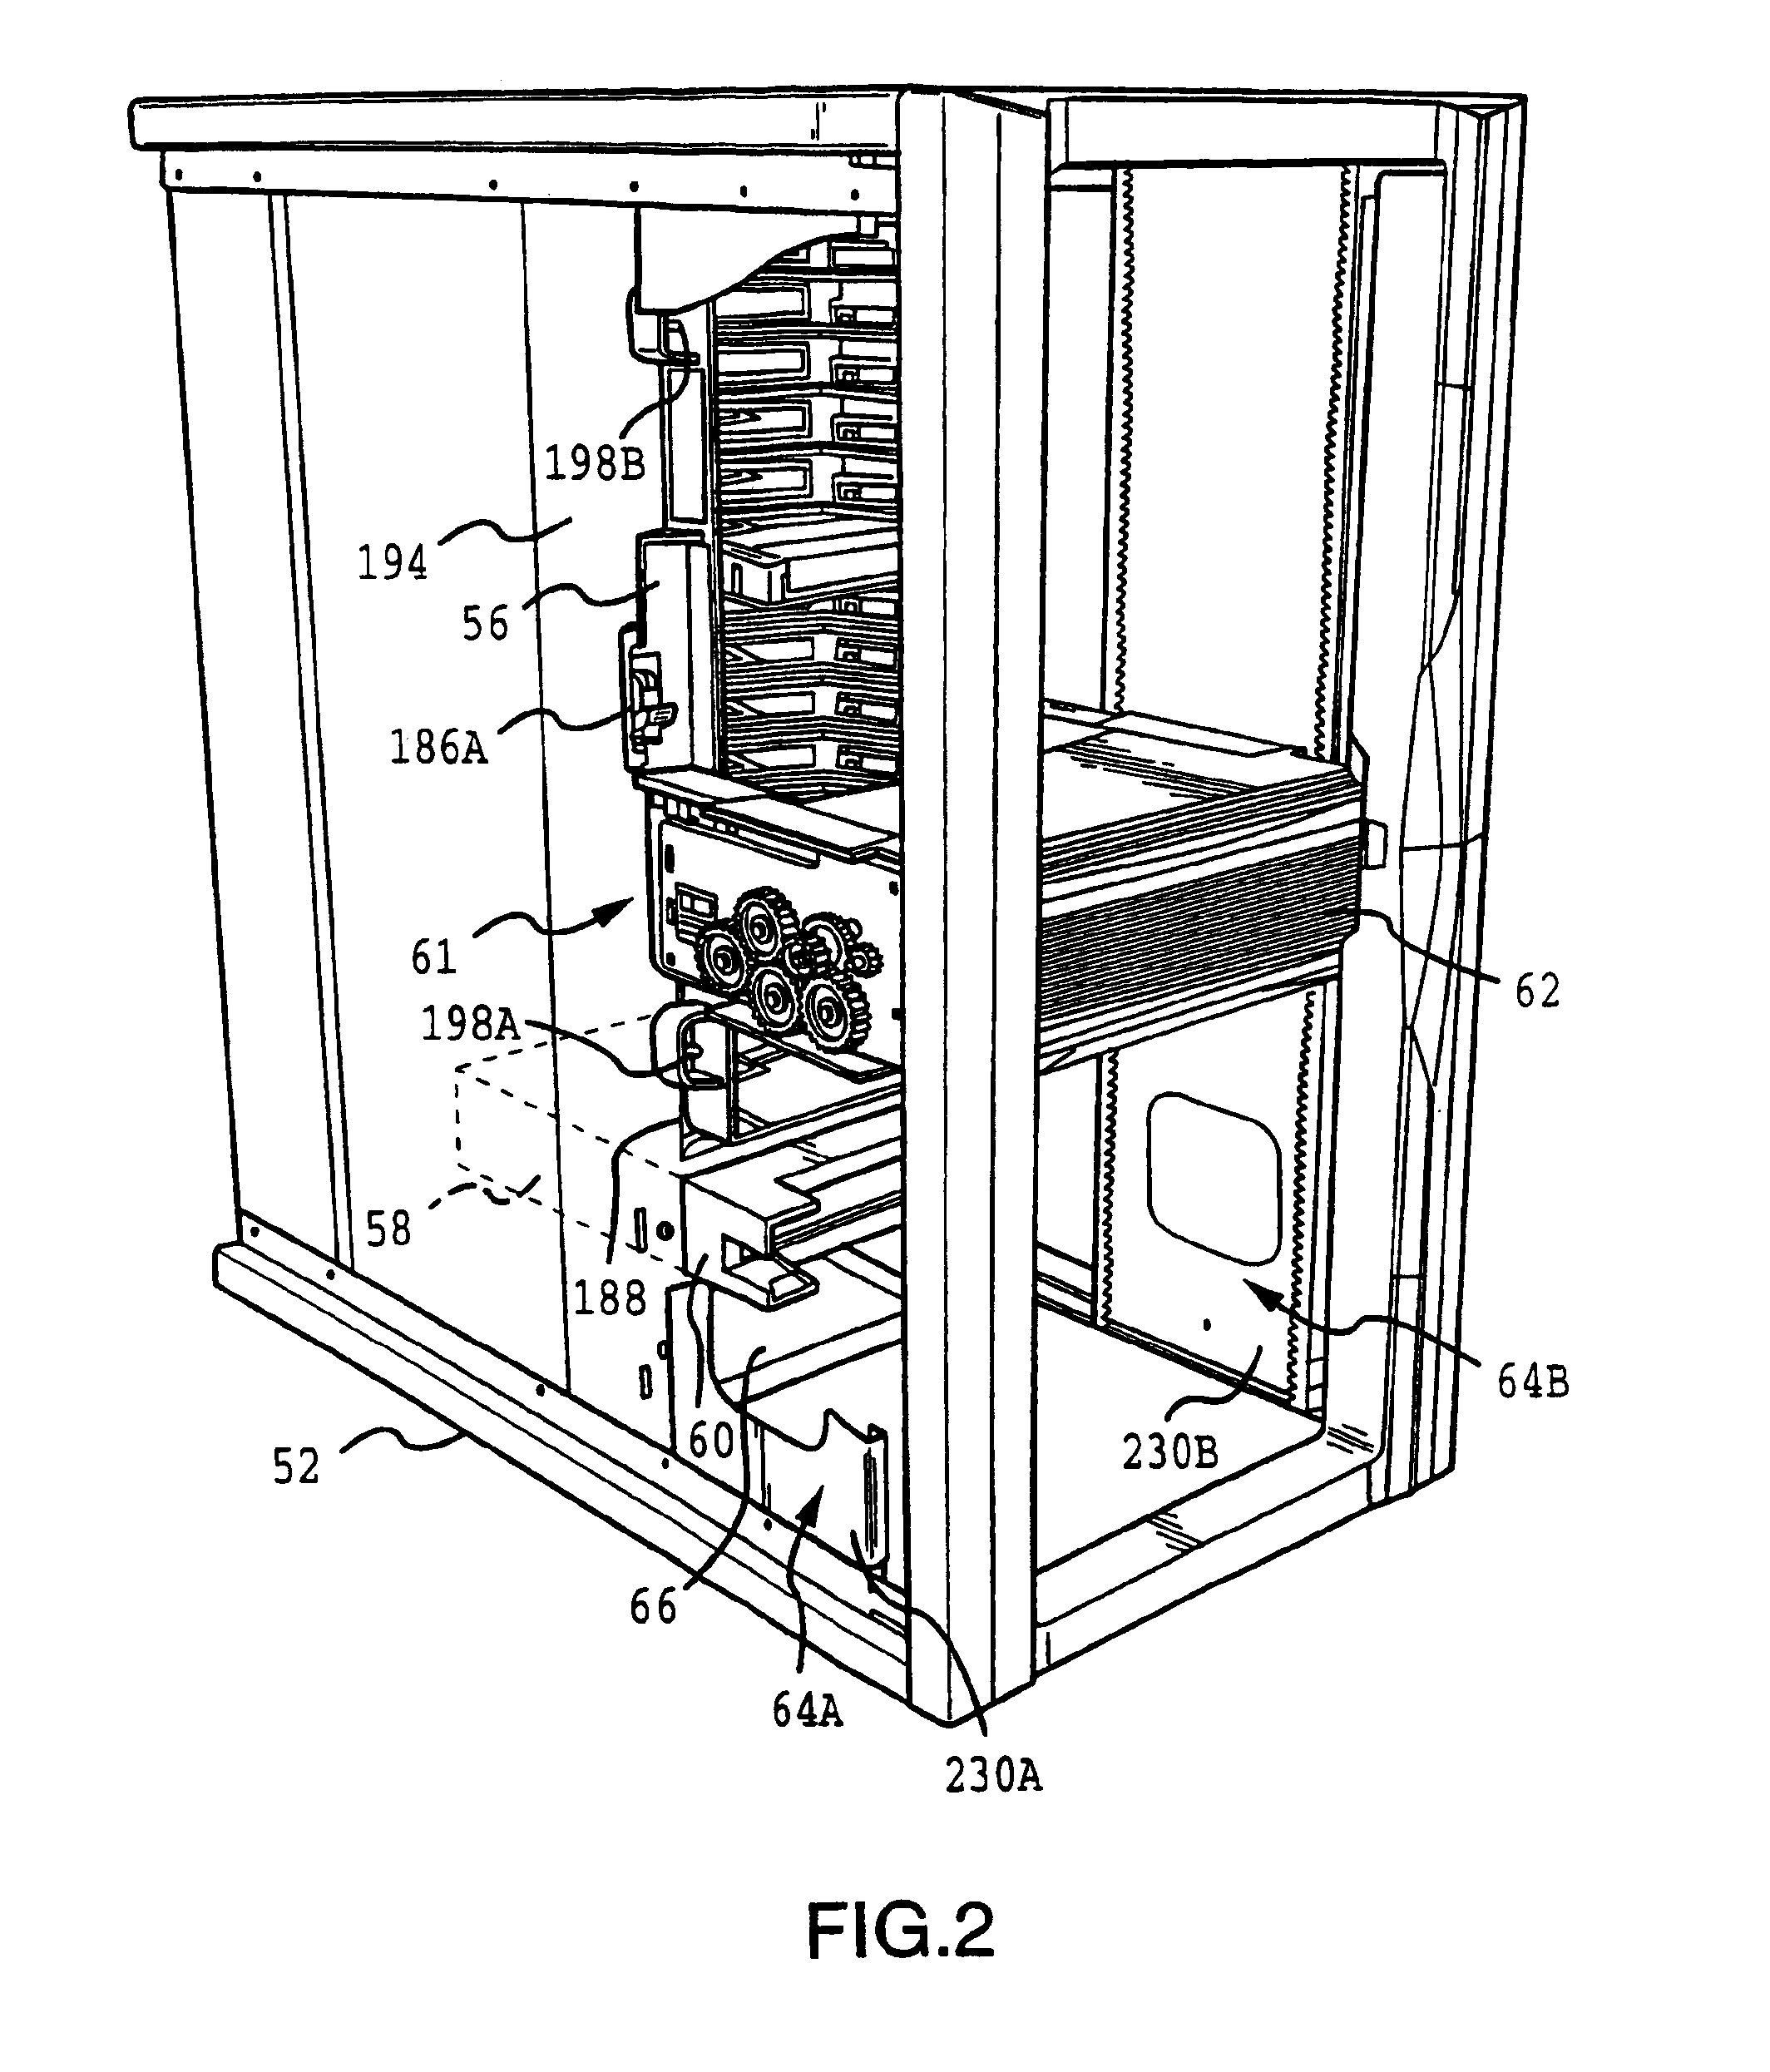 Data cartridge holder operable with a data cartridge library system